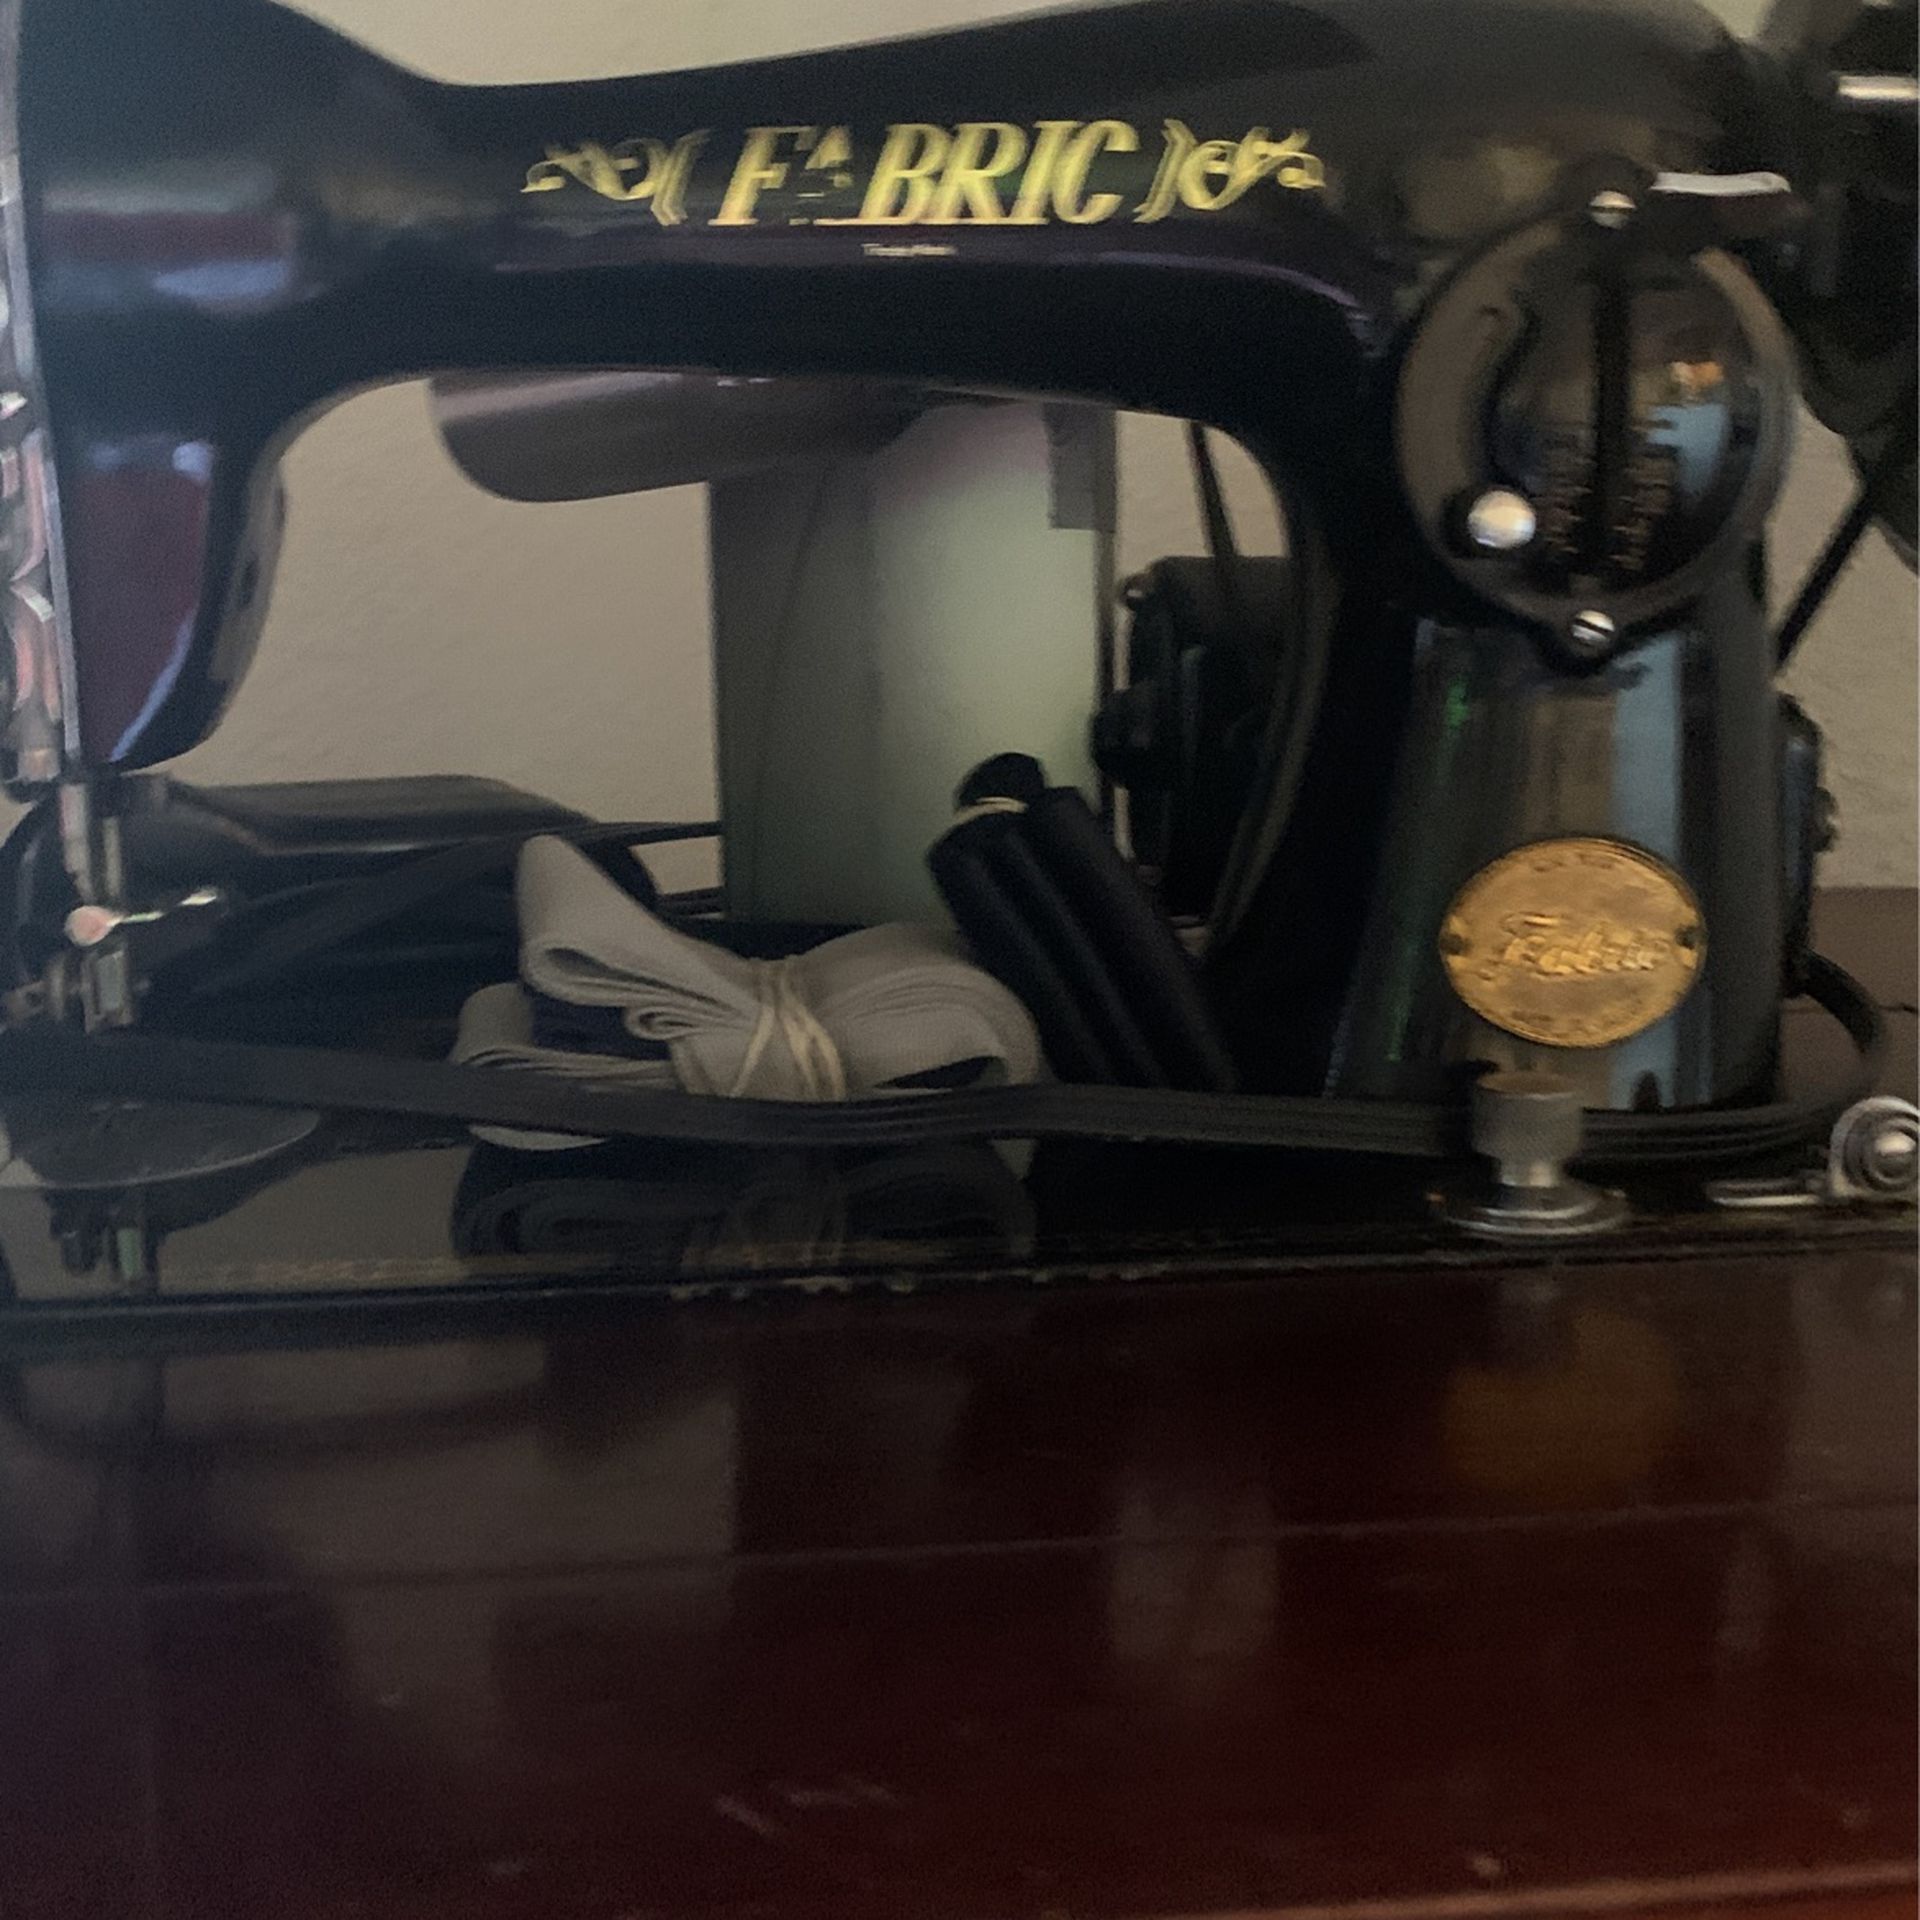 Selling a sewing machine